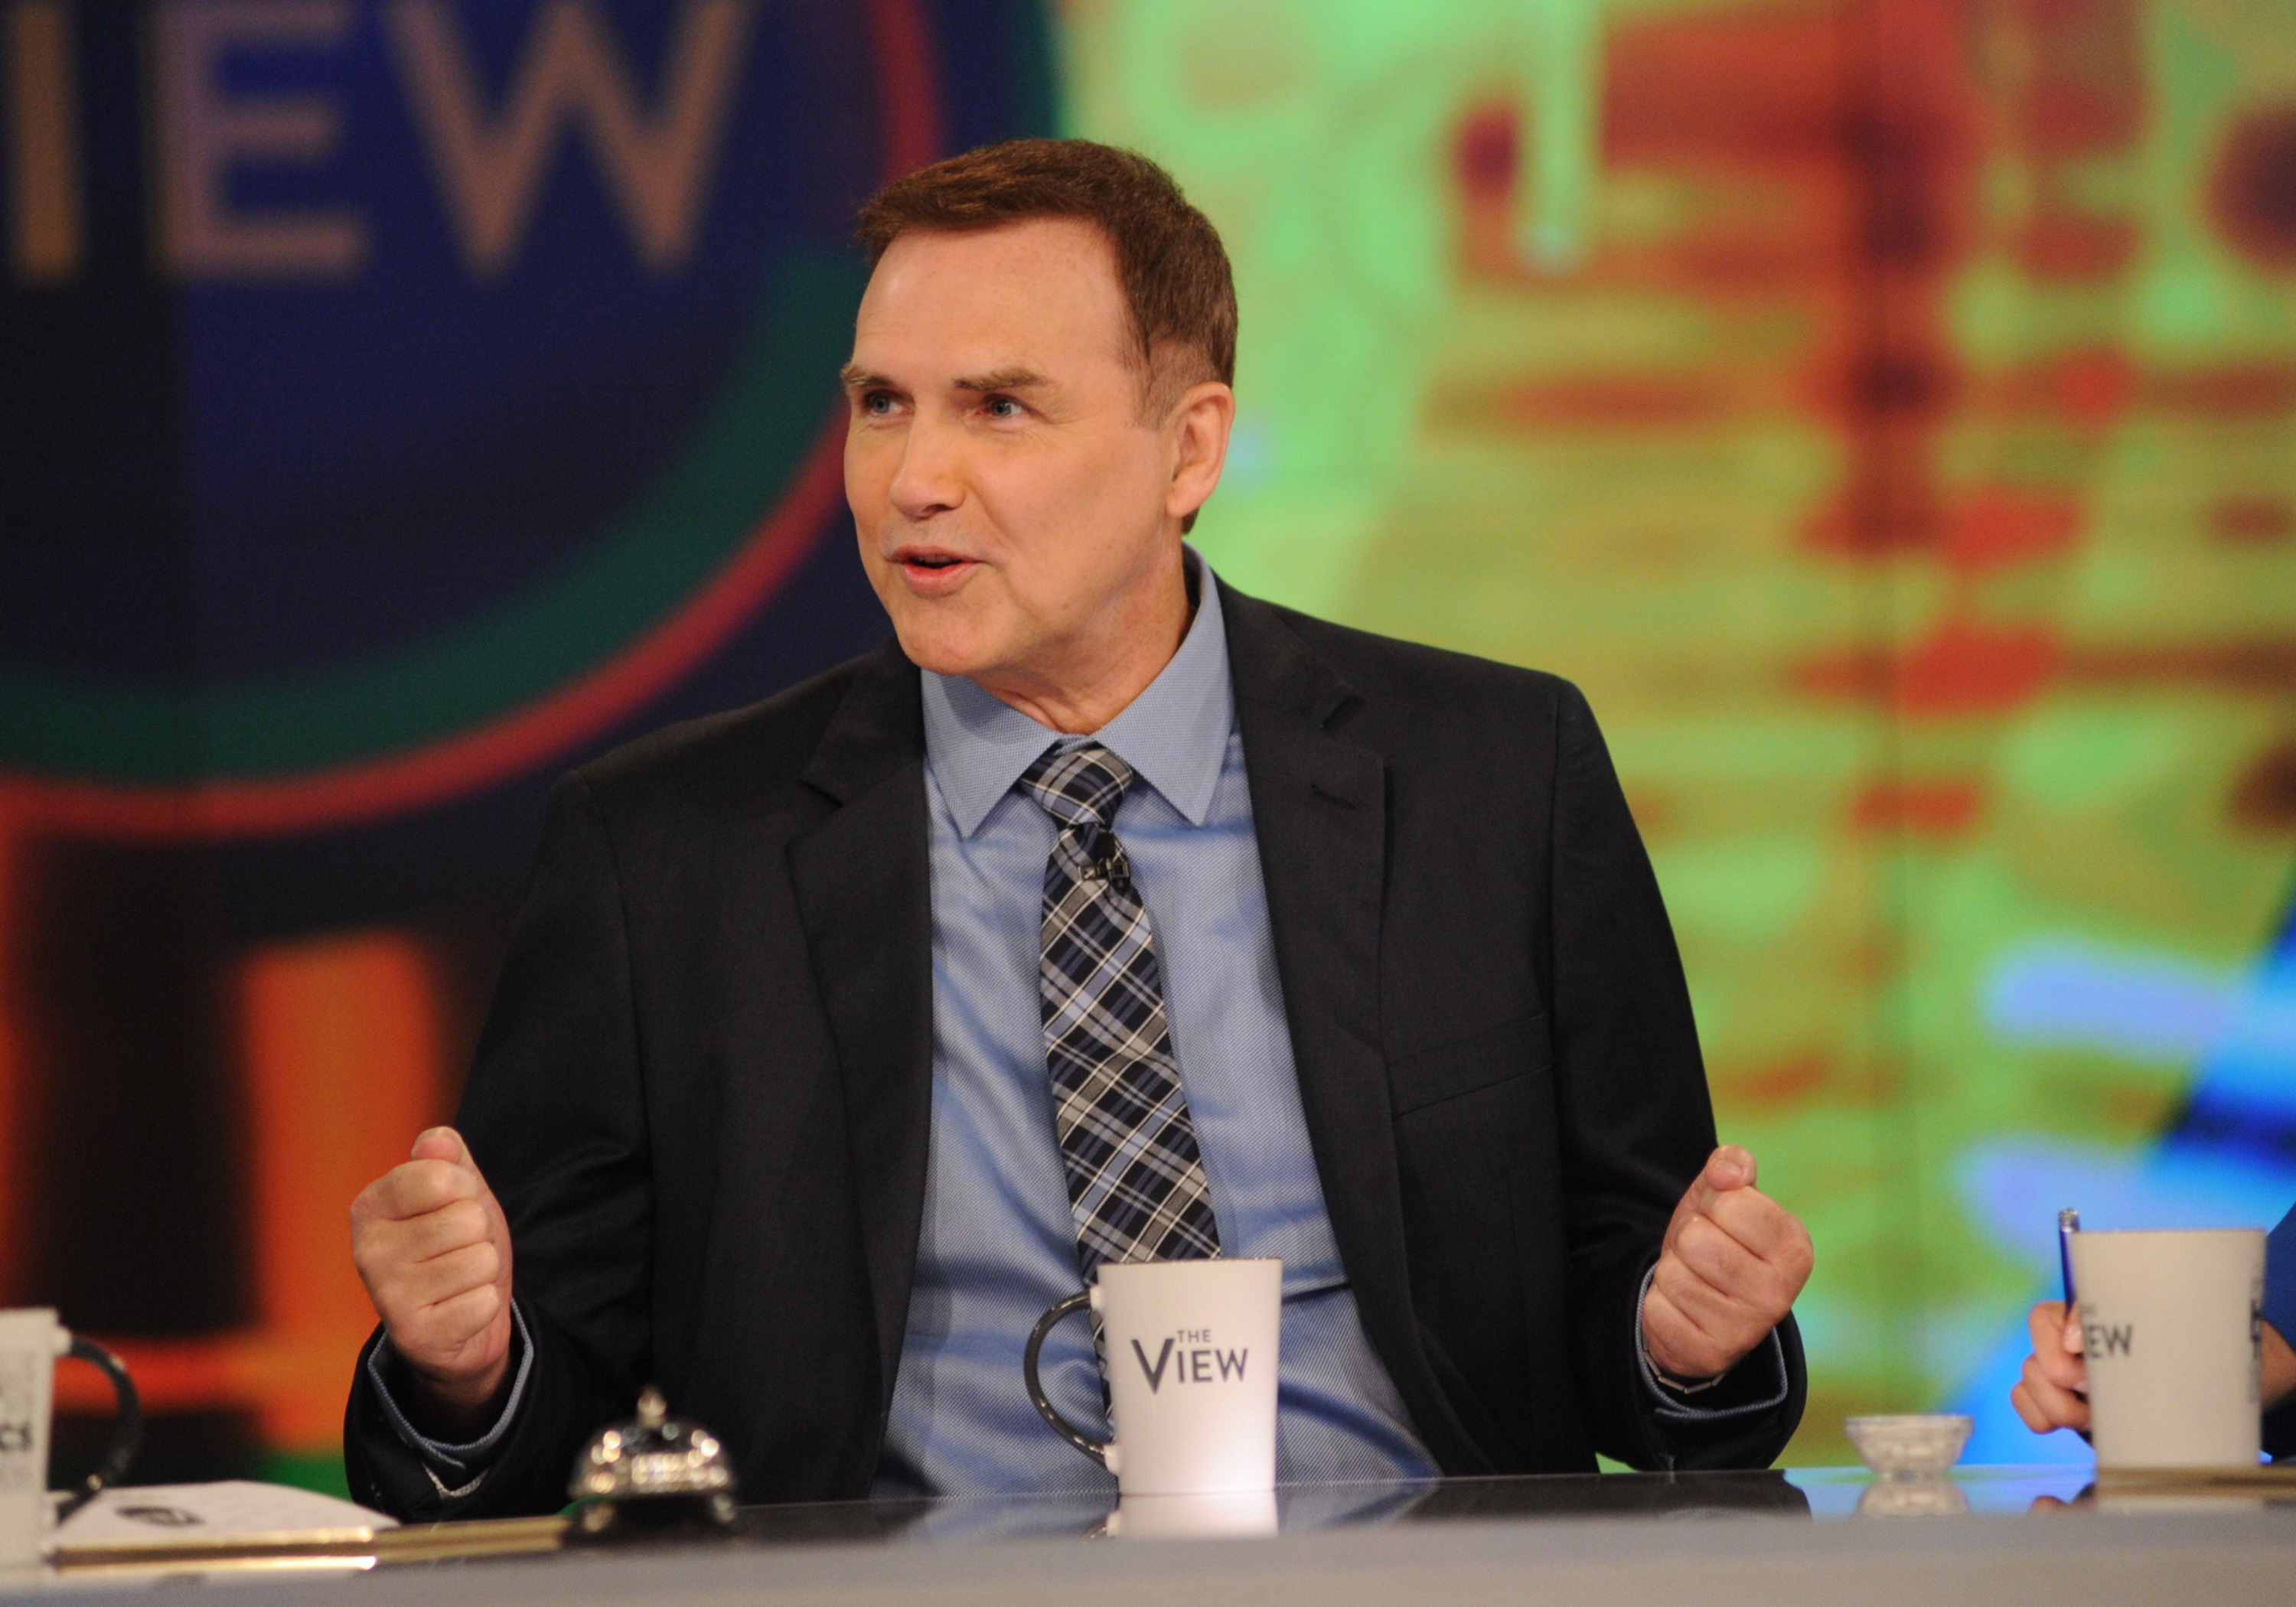 Norm Macdonald on season 21 of "The View" on September 13, 2018 | Source: Getty Images